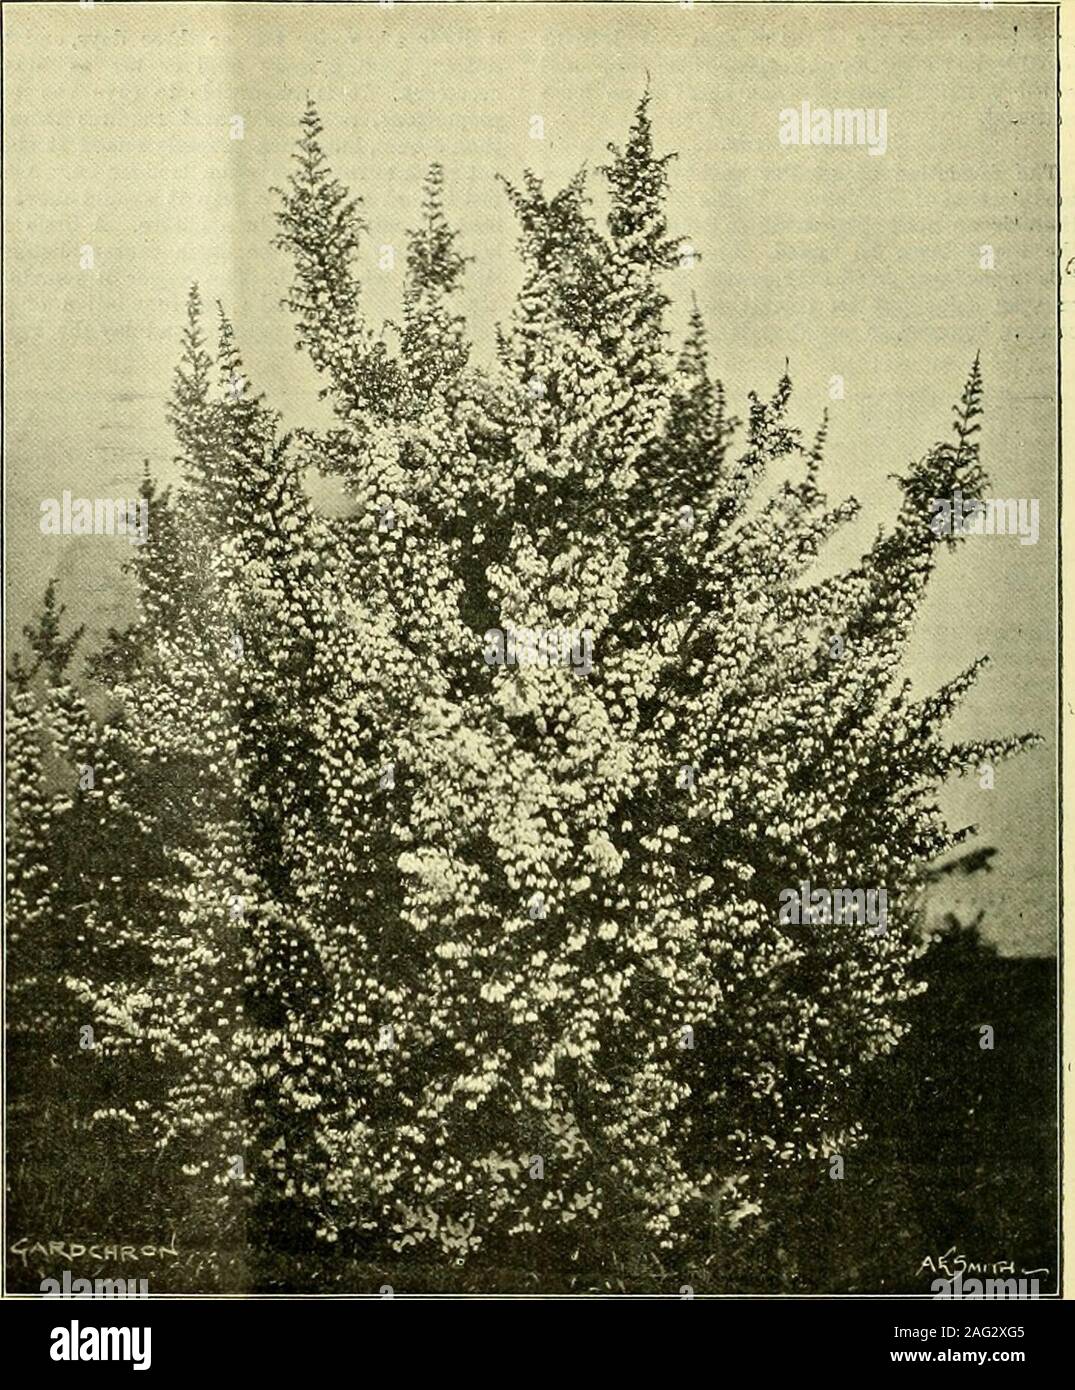 . The Gardeners' chronicle : a weekly illustrated journal of horticulture and allied subjects. 1^ Fig. 98.—erica lusitanica (codonodes), one of the parents of e. x veitchii. Showing a single leaf, a flower, and a section through a flower, all magn. 4 diani. ; pollen-graius magQ. 300 diani.. Fig. 97.-erica x veitchii, from a natural cross betweene. lusitanica (codonodes) and e. arborea. Stock Photo